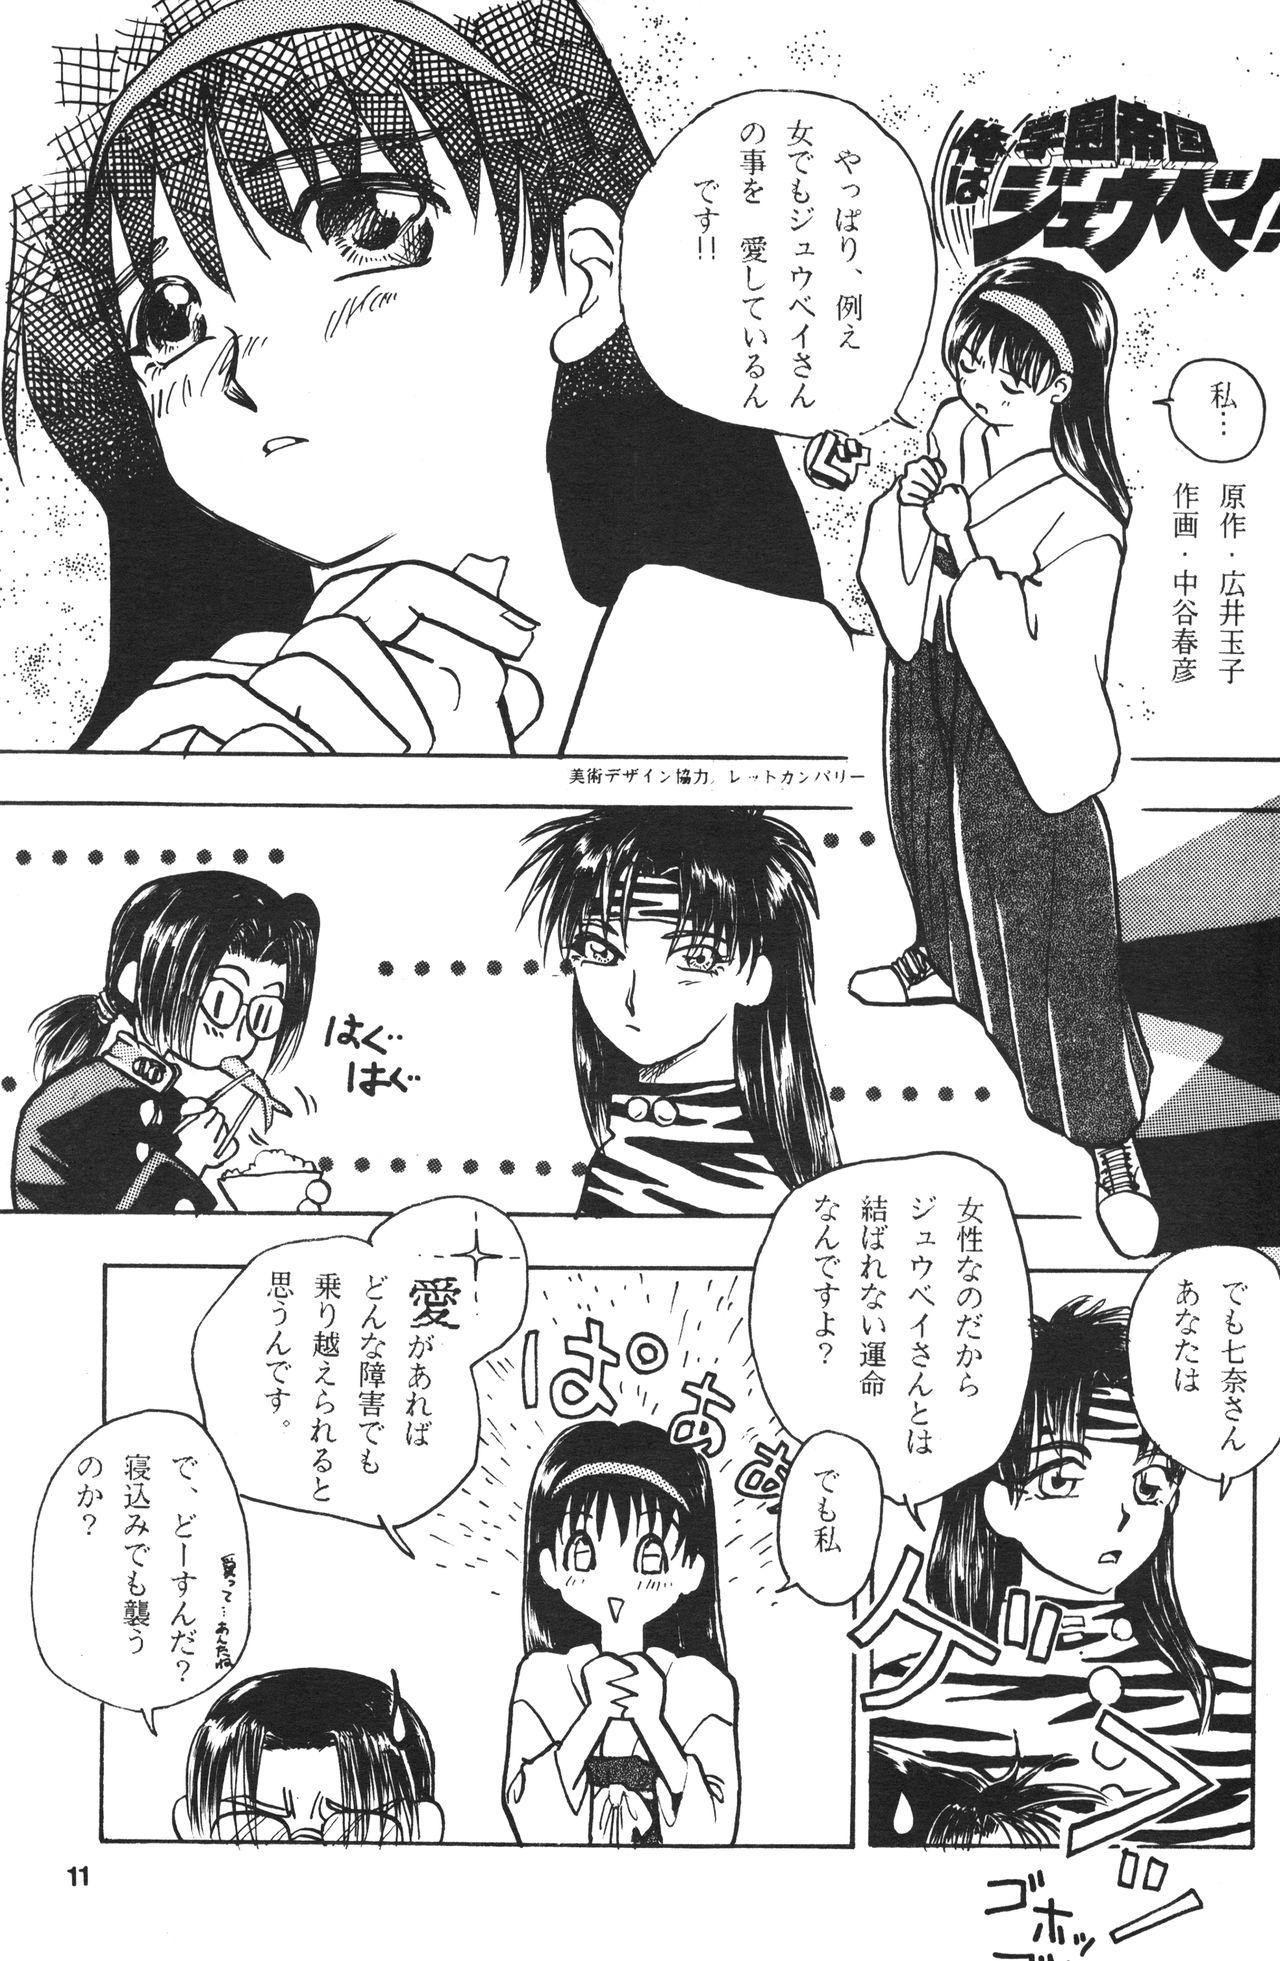 Chilena Seinen Sunday - Street fighter Ranma 12 Ghost sweeper mikami Class - Page 10